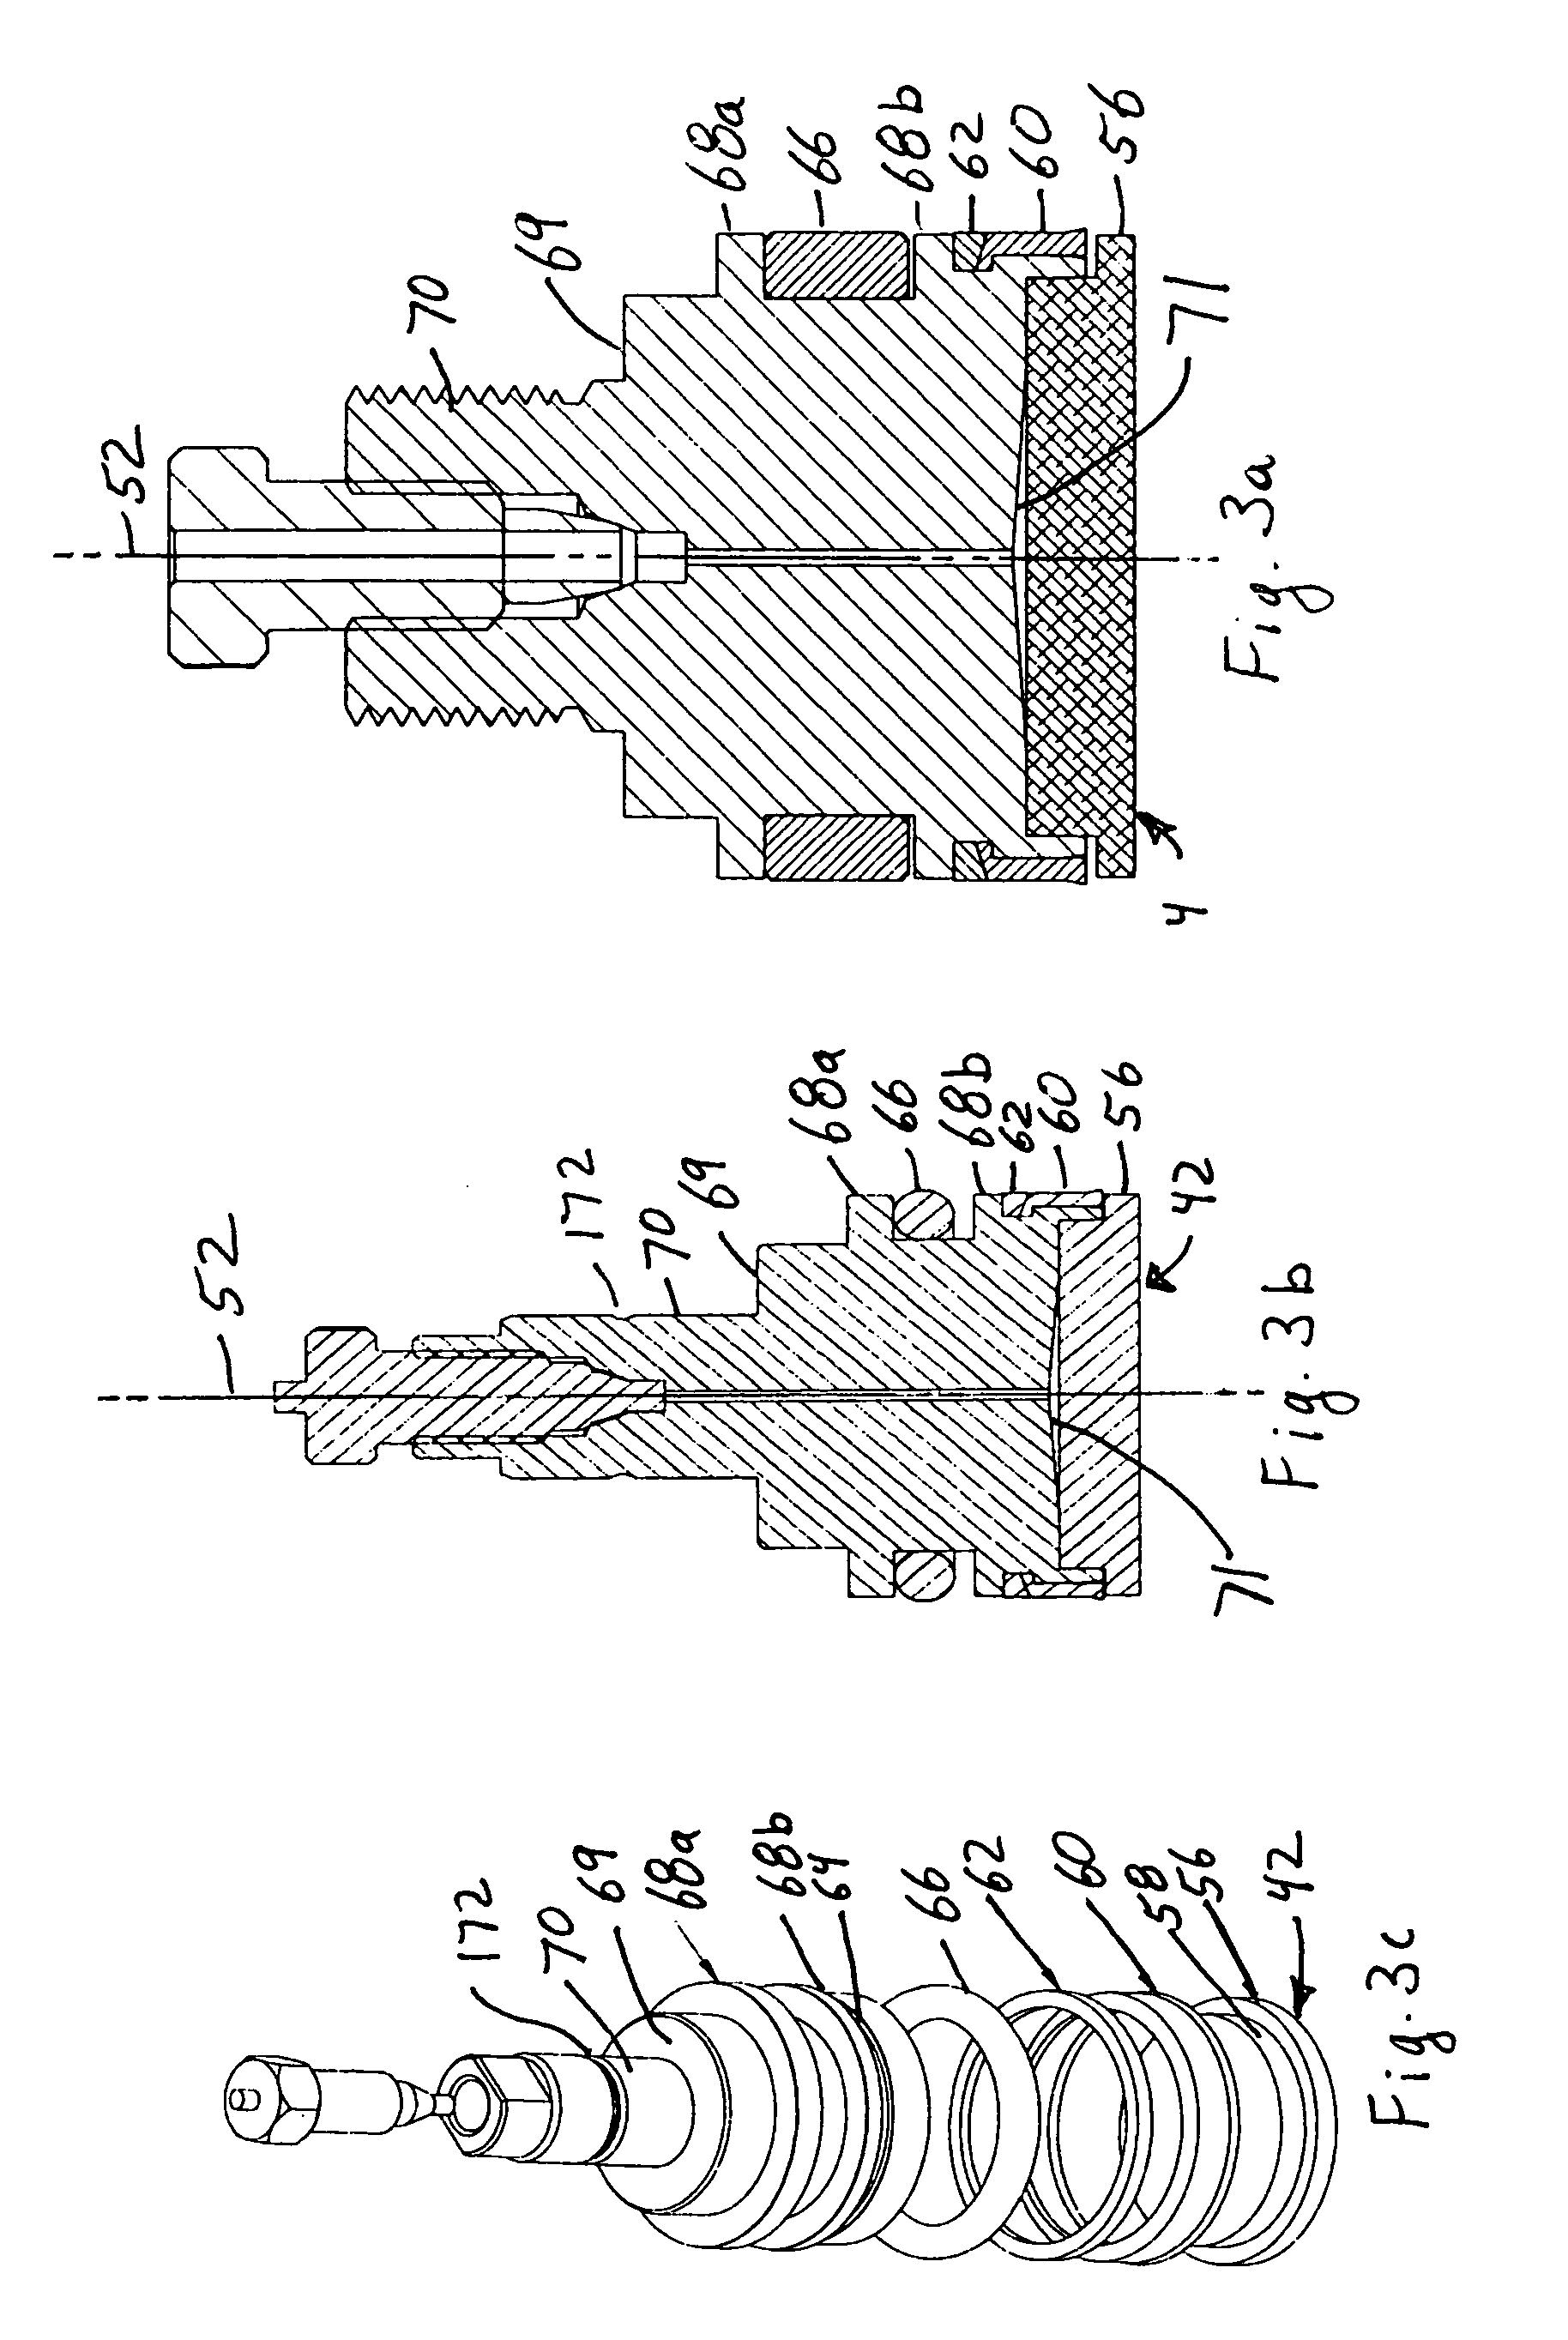 Method and apparatus for packing chromatography columns